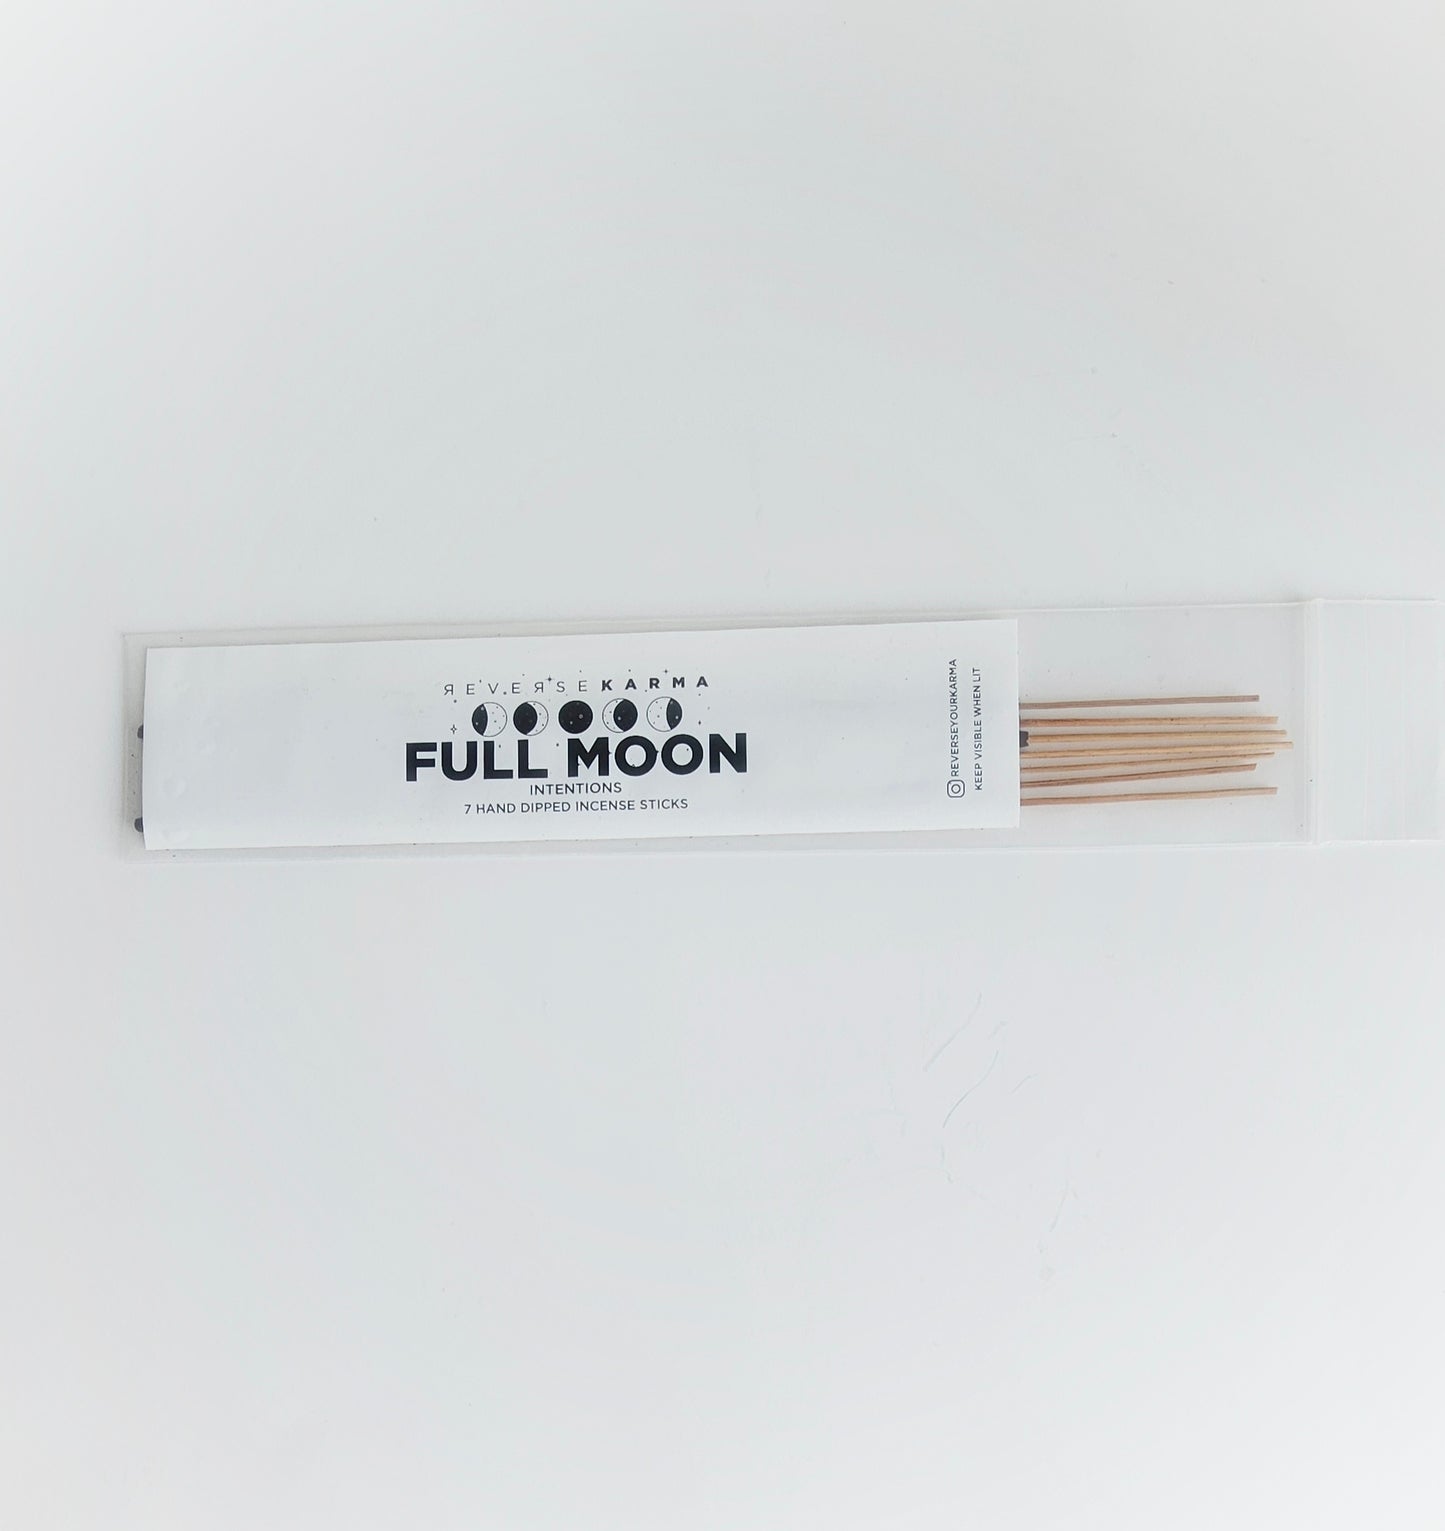 FULL MOON INTENTIONS INCENSE